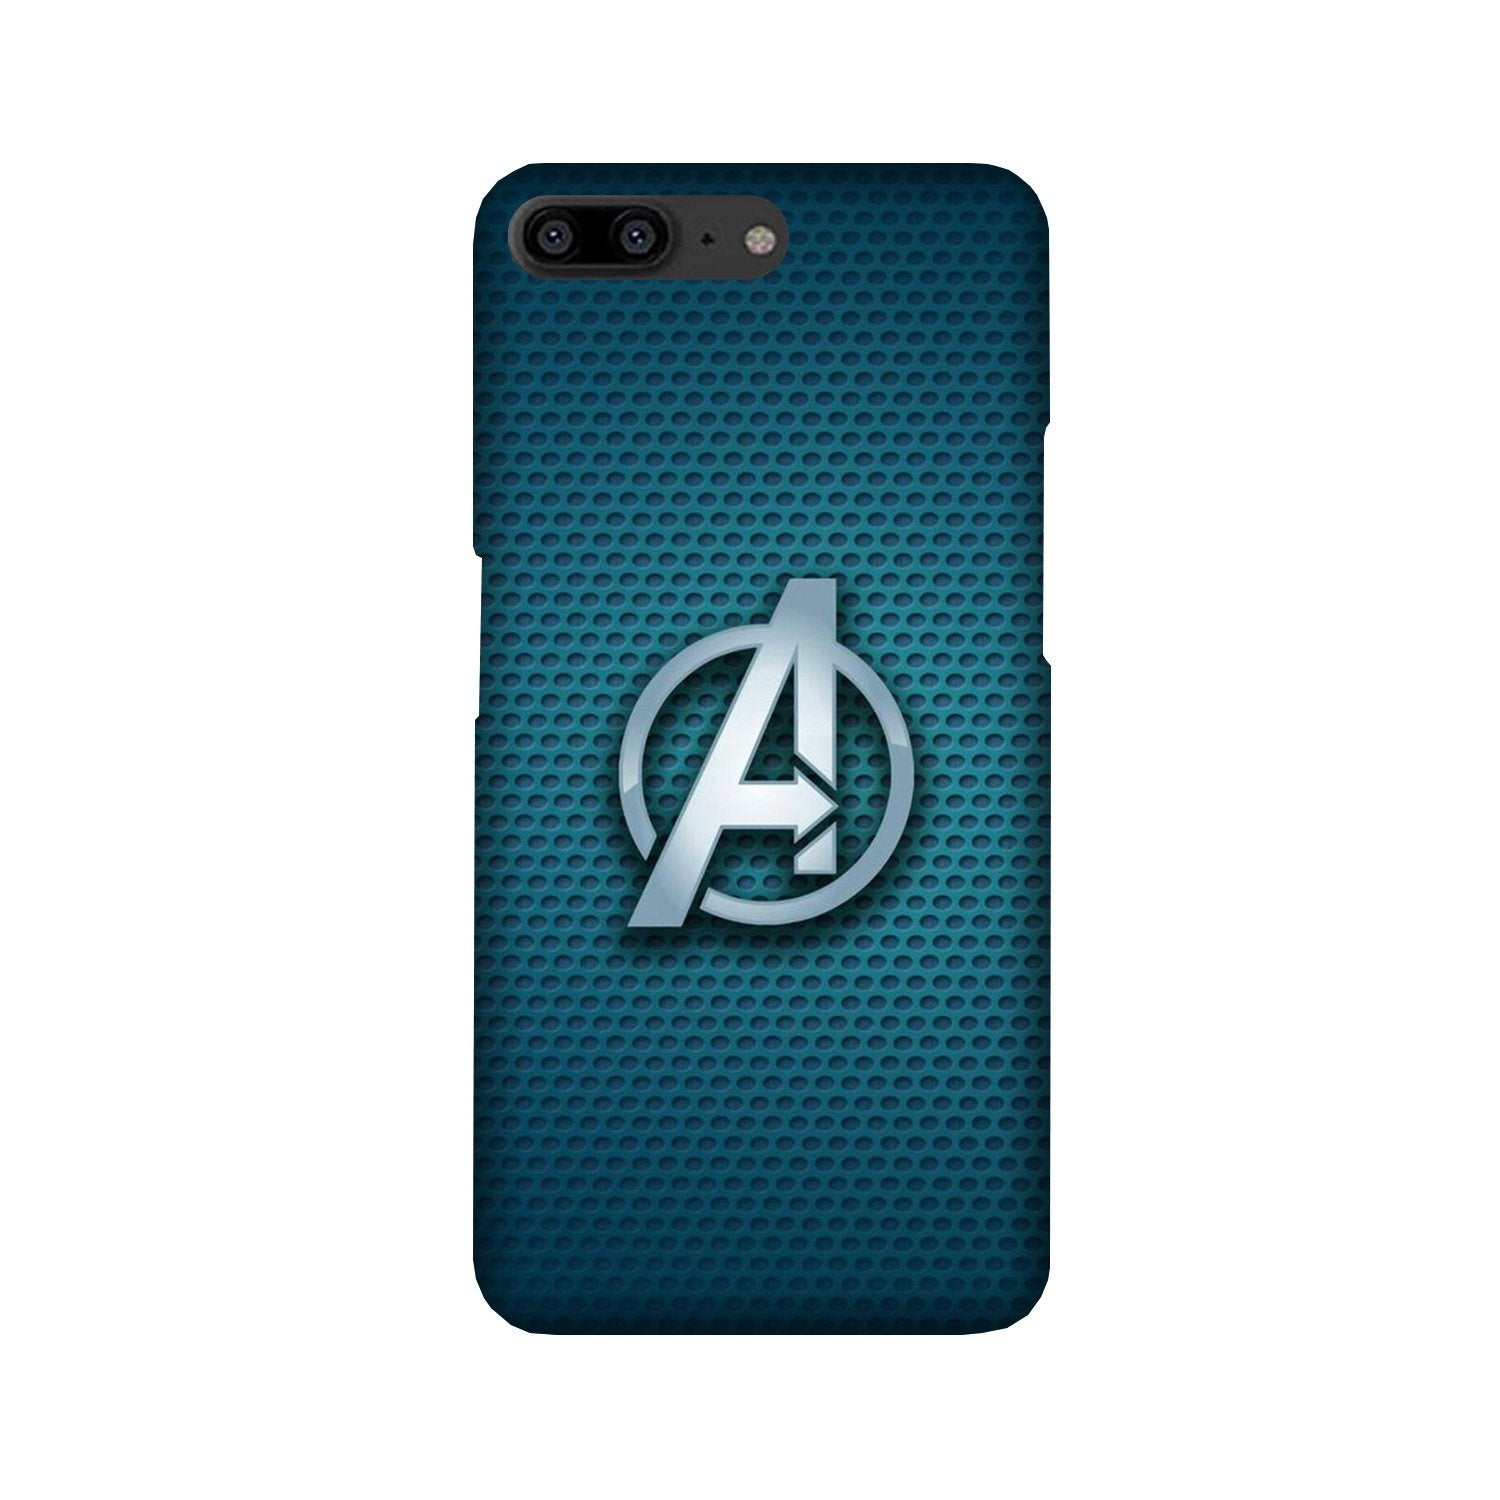 Avengers Case for OnePlus 5 (Design No. 246)